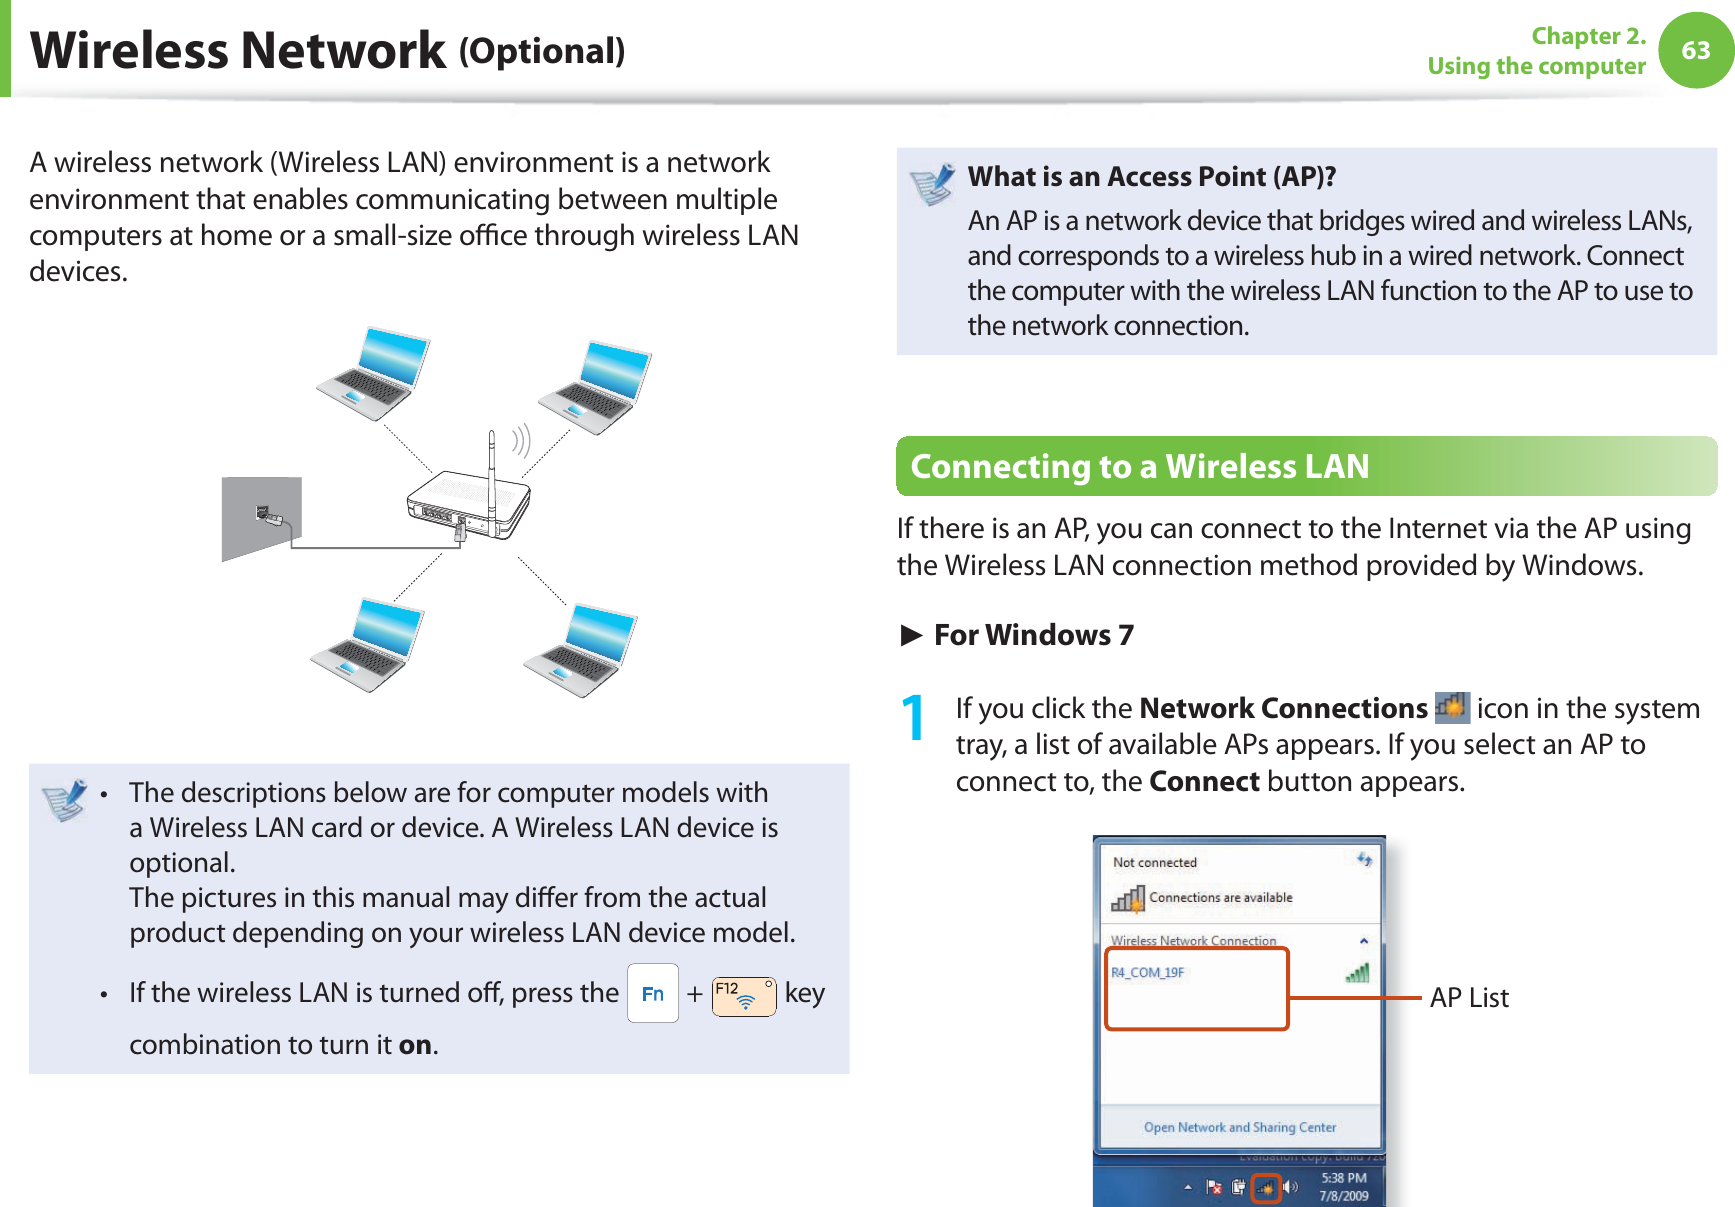 63Chapter 2. Using the computerA wireless network (Wireless LAN) environment is a network environment that enables communicating between multiple computers at home or a small-size o  ce through wireless LAN devices.The descriptions below are for computer models with t a Wireless LAN card or device. A Wireless LAN device is optional.The pictures in this manual may di er from the actual product depending on your wireless LAN device model.If the wireless LAN is turned o , press the t  +   key combination to turn it on.What is an Access Point ( AP)?An AP is a network device that bridges wired and wireless LANs, and corresponds to a wireless hub in a wired network. Connect the computer with the wireless LAN function to the AP to use to the network connection.Connecting to a Wireless LANIf there is an AP, you can connect to the Internet via the AP using the Wireless LAN connection method provided by Windows.► For Windows 71  If you click the Network Connections  icon in the system tray, a list of available APs appears. If you select an AP to connect to, the Connect button appears.AP List Wireless  Network  (Optional)